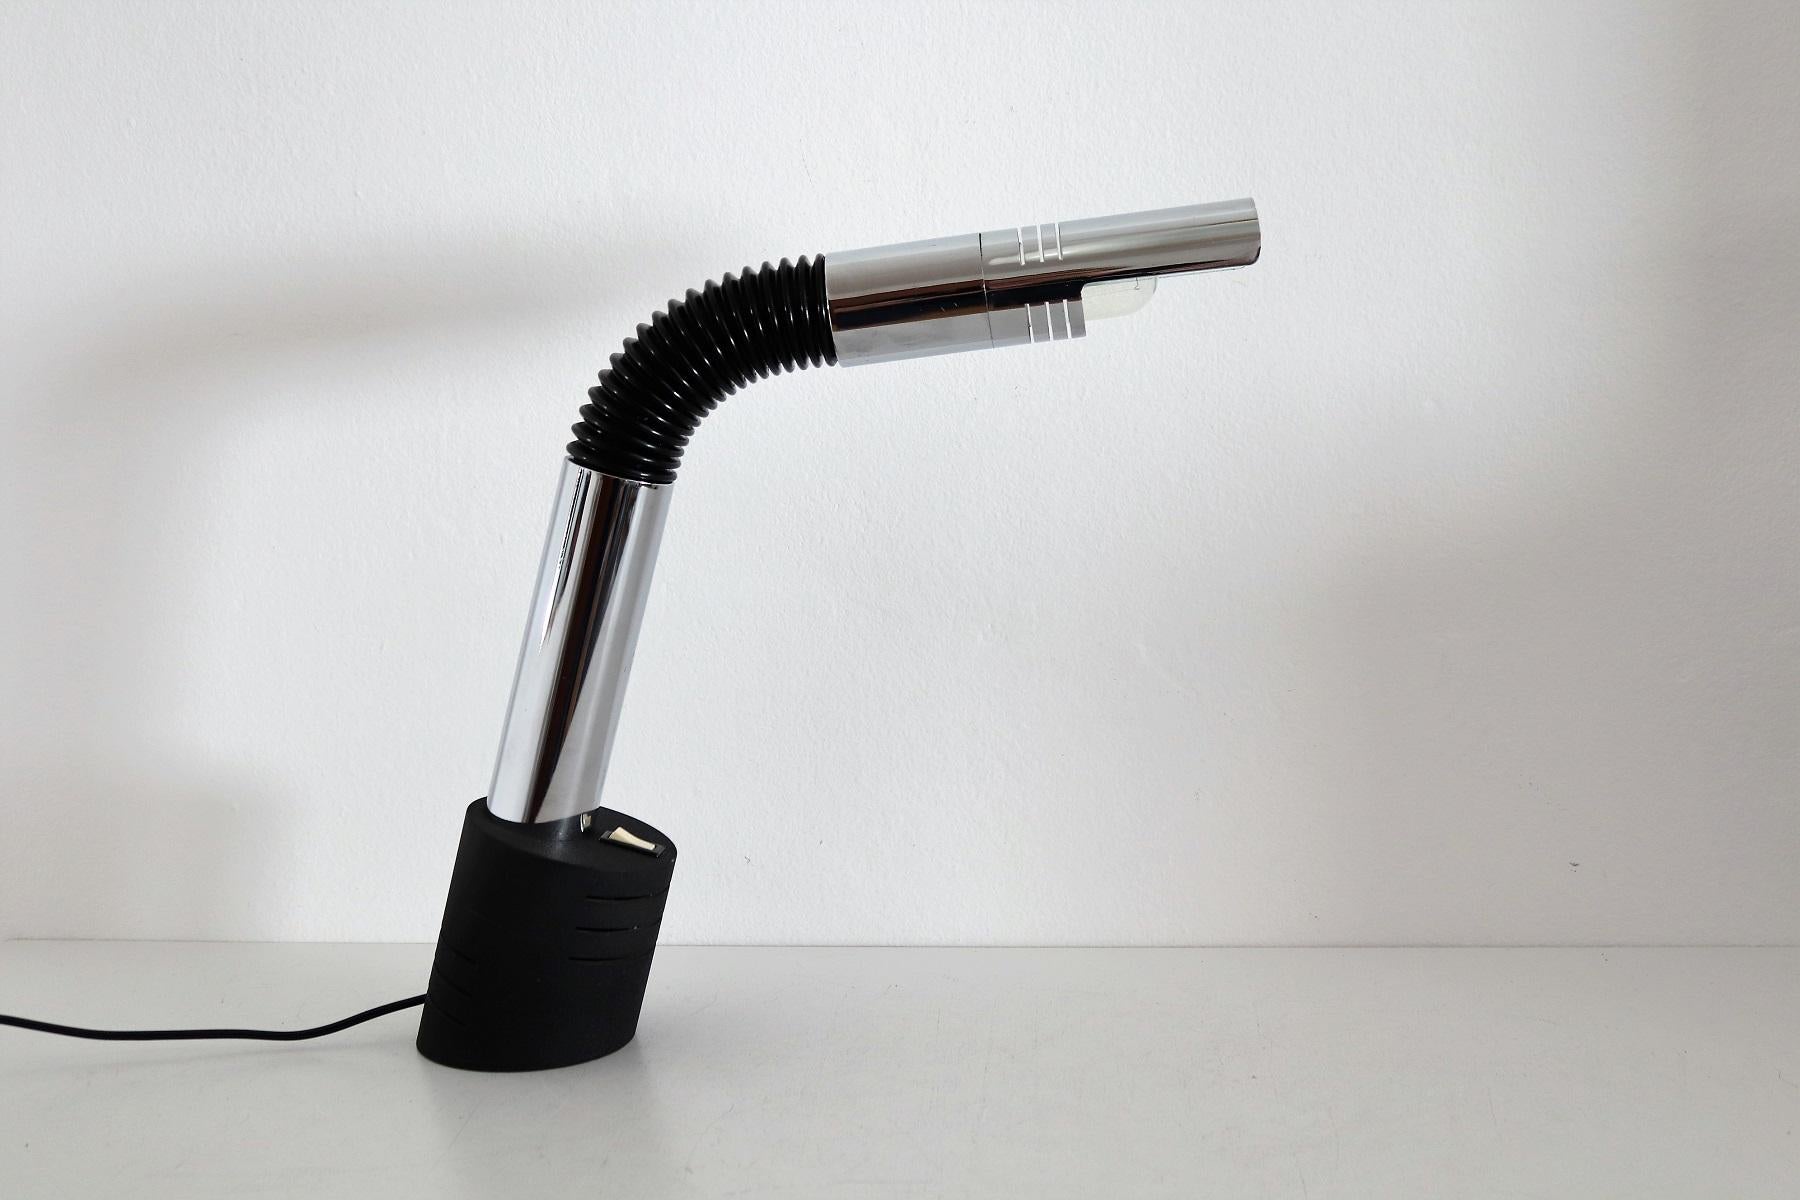 Gorgeous desk lamp with heavy cast iron base, perfect for the working desk!
Made in Italy by Targetti during the 1970s/1980s, Design from Mario Bellini.
The swivel arm can be adjusted to the preferred position, the chrome is in great shiny condition